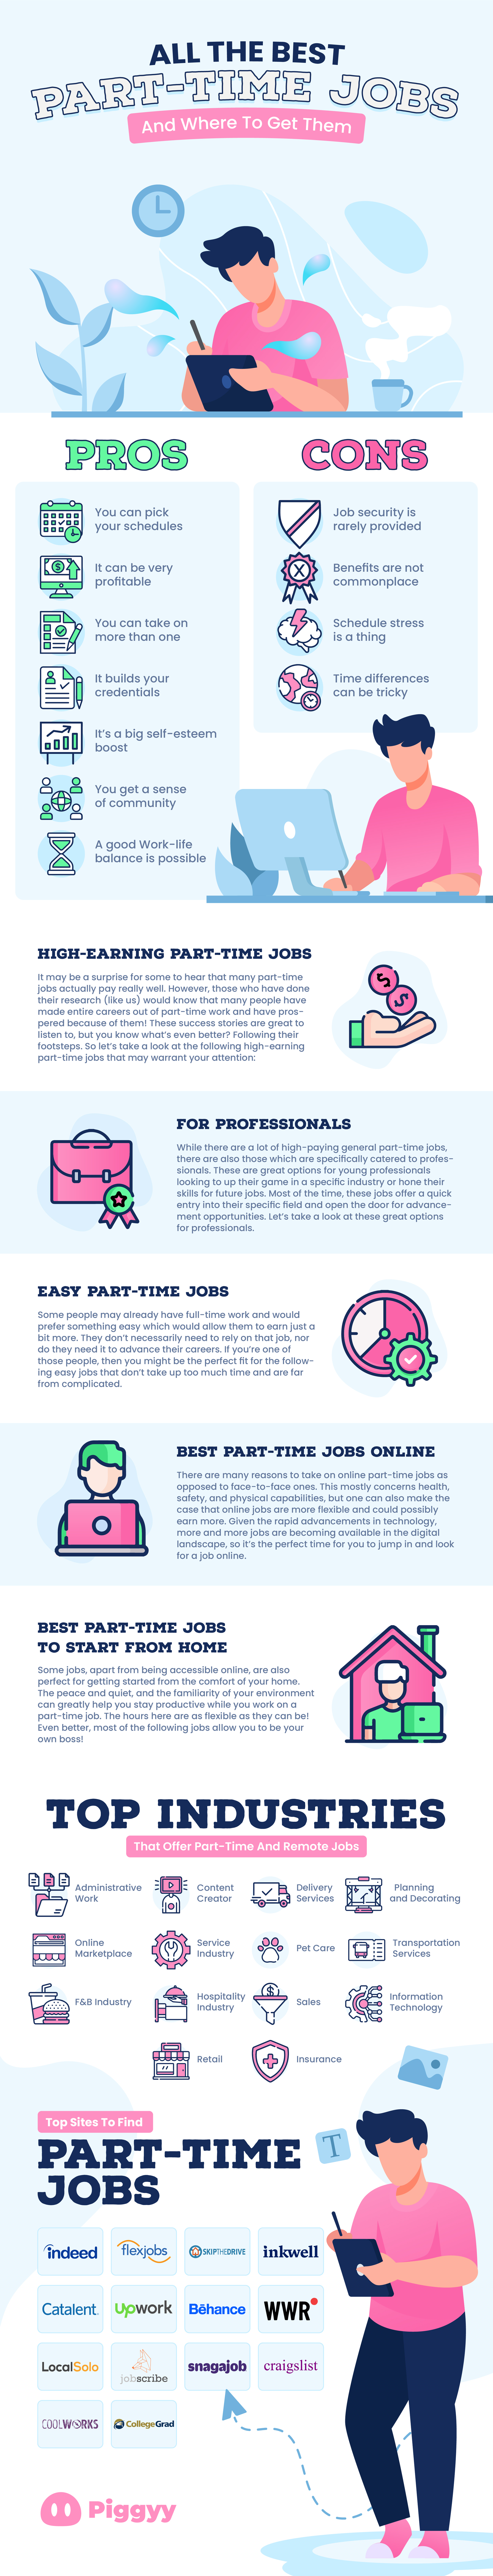 All The Best Part-Time Jobs And Where To Find Them